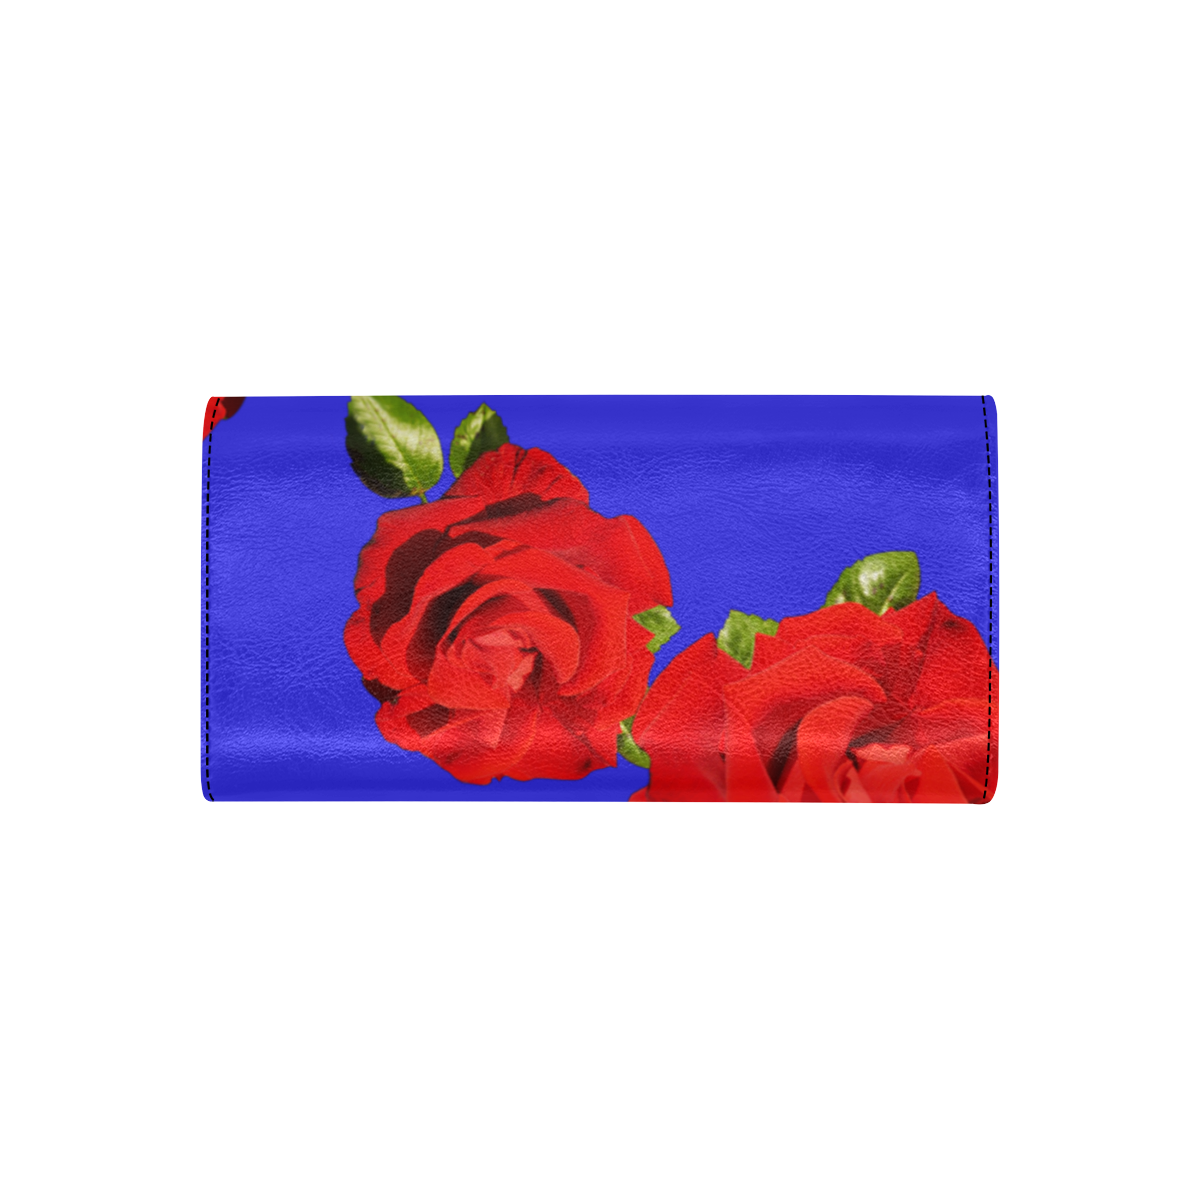 Fairlings Delight's Floral Luxury Collection- Red Rose Women's Flap Wallet 53086c11 Women's Flap Wallet (Model 1707)